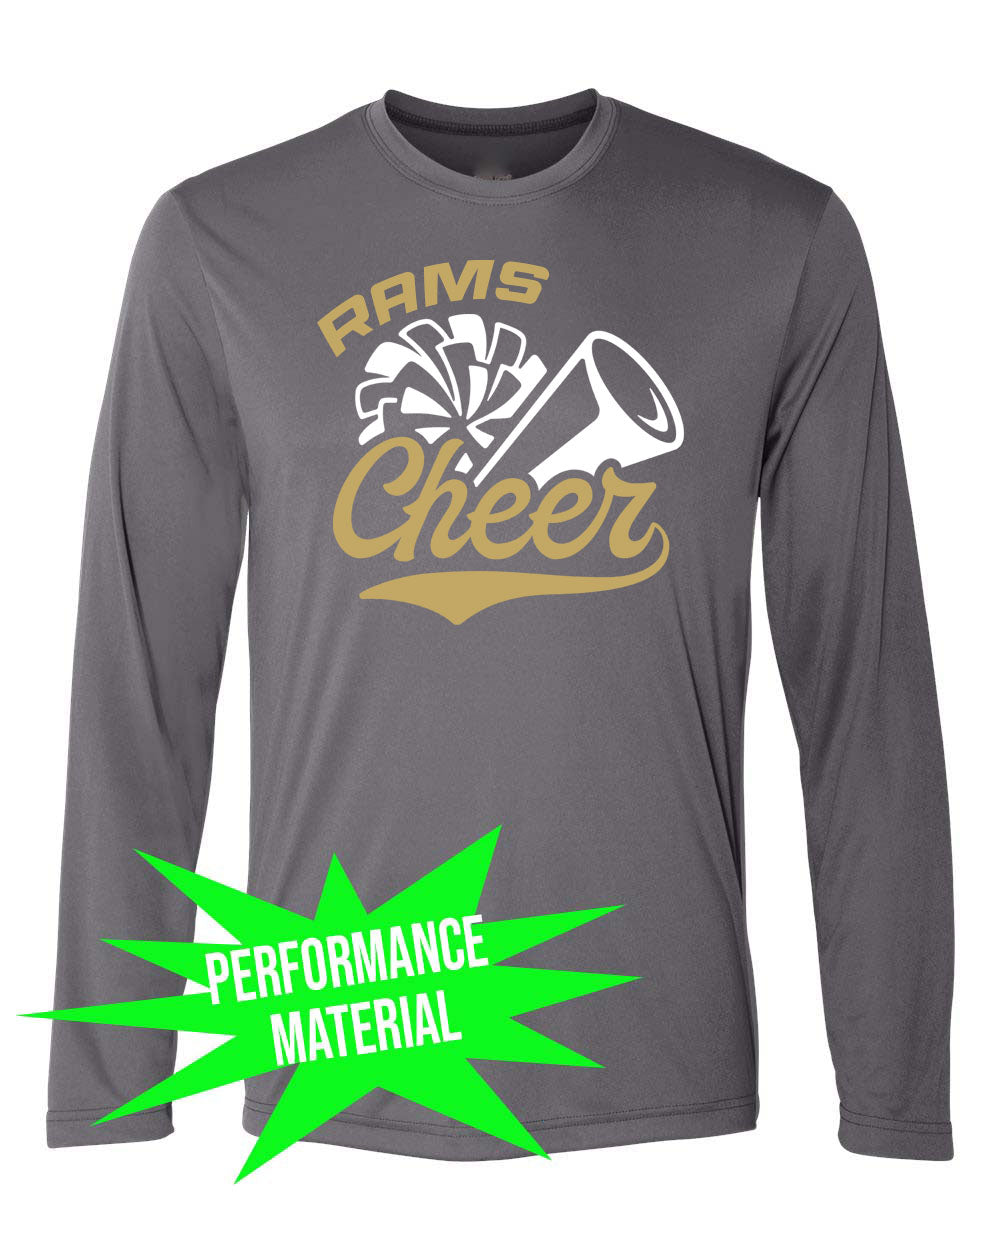 Sussex Middle Cheer Performance Material Design 1 Long Sleeve Shirt